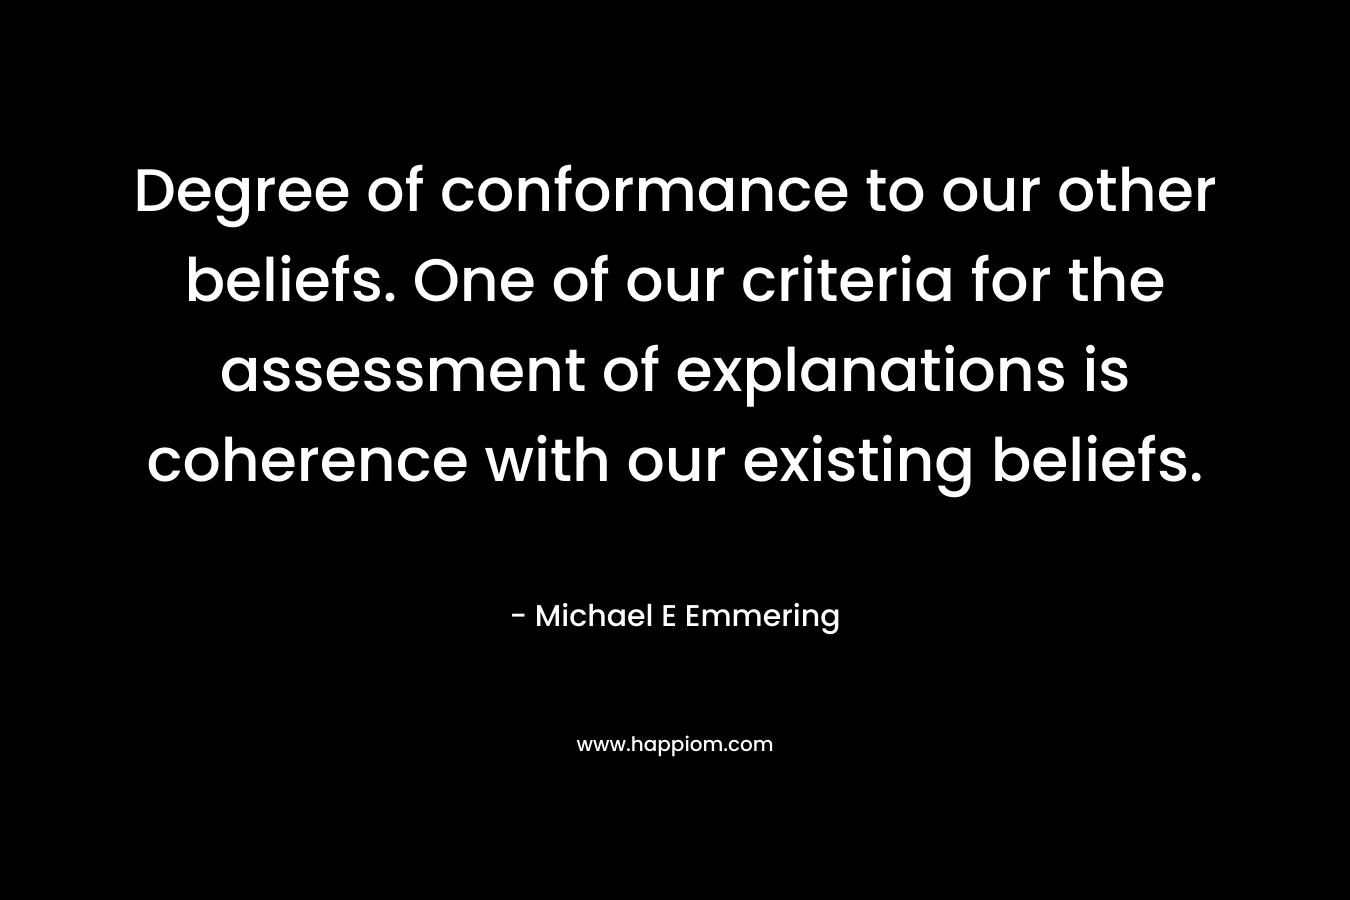 Degree of conformance to our other beliefs. One of our criteria for the assessment of explanations is coherence with our existing beliefs. – Michael E Emmering